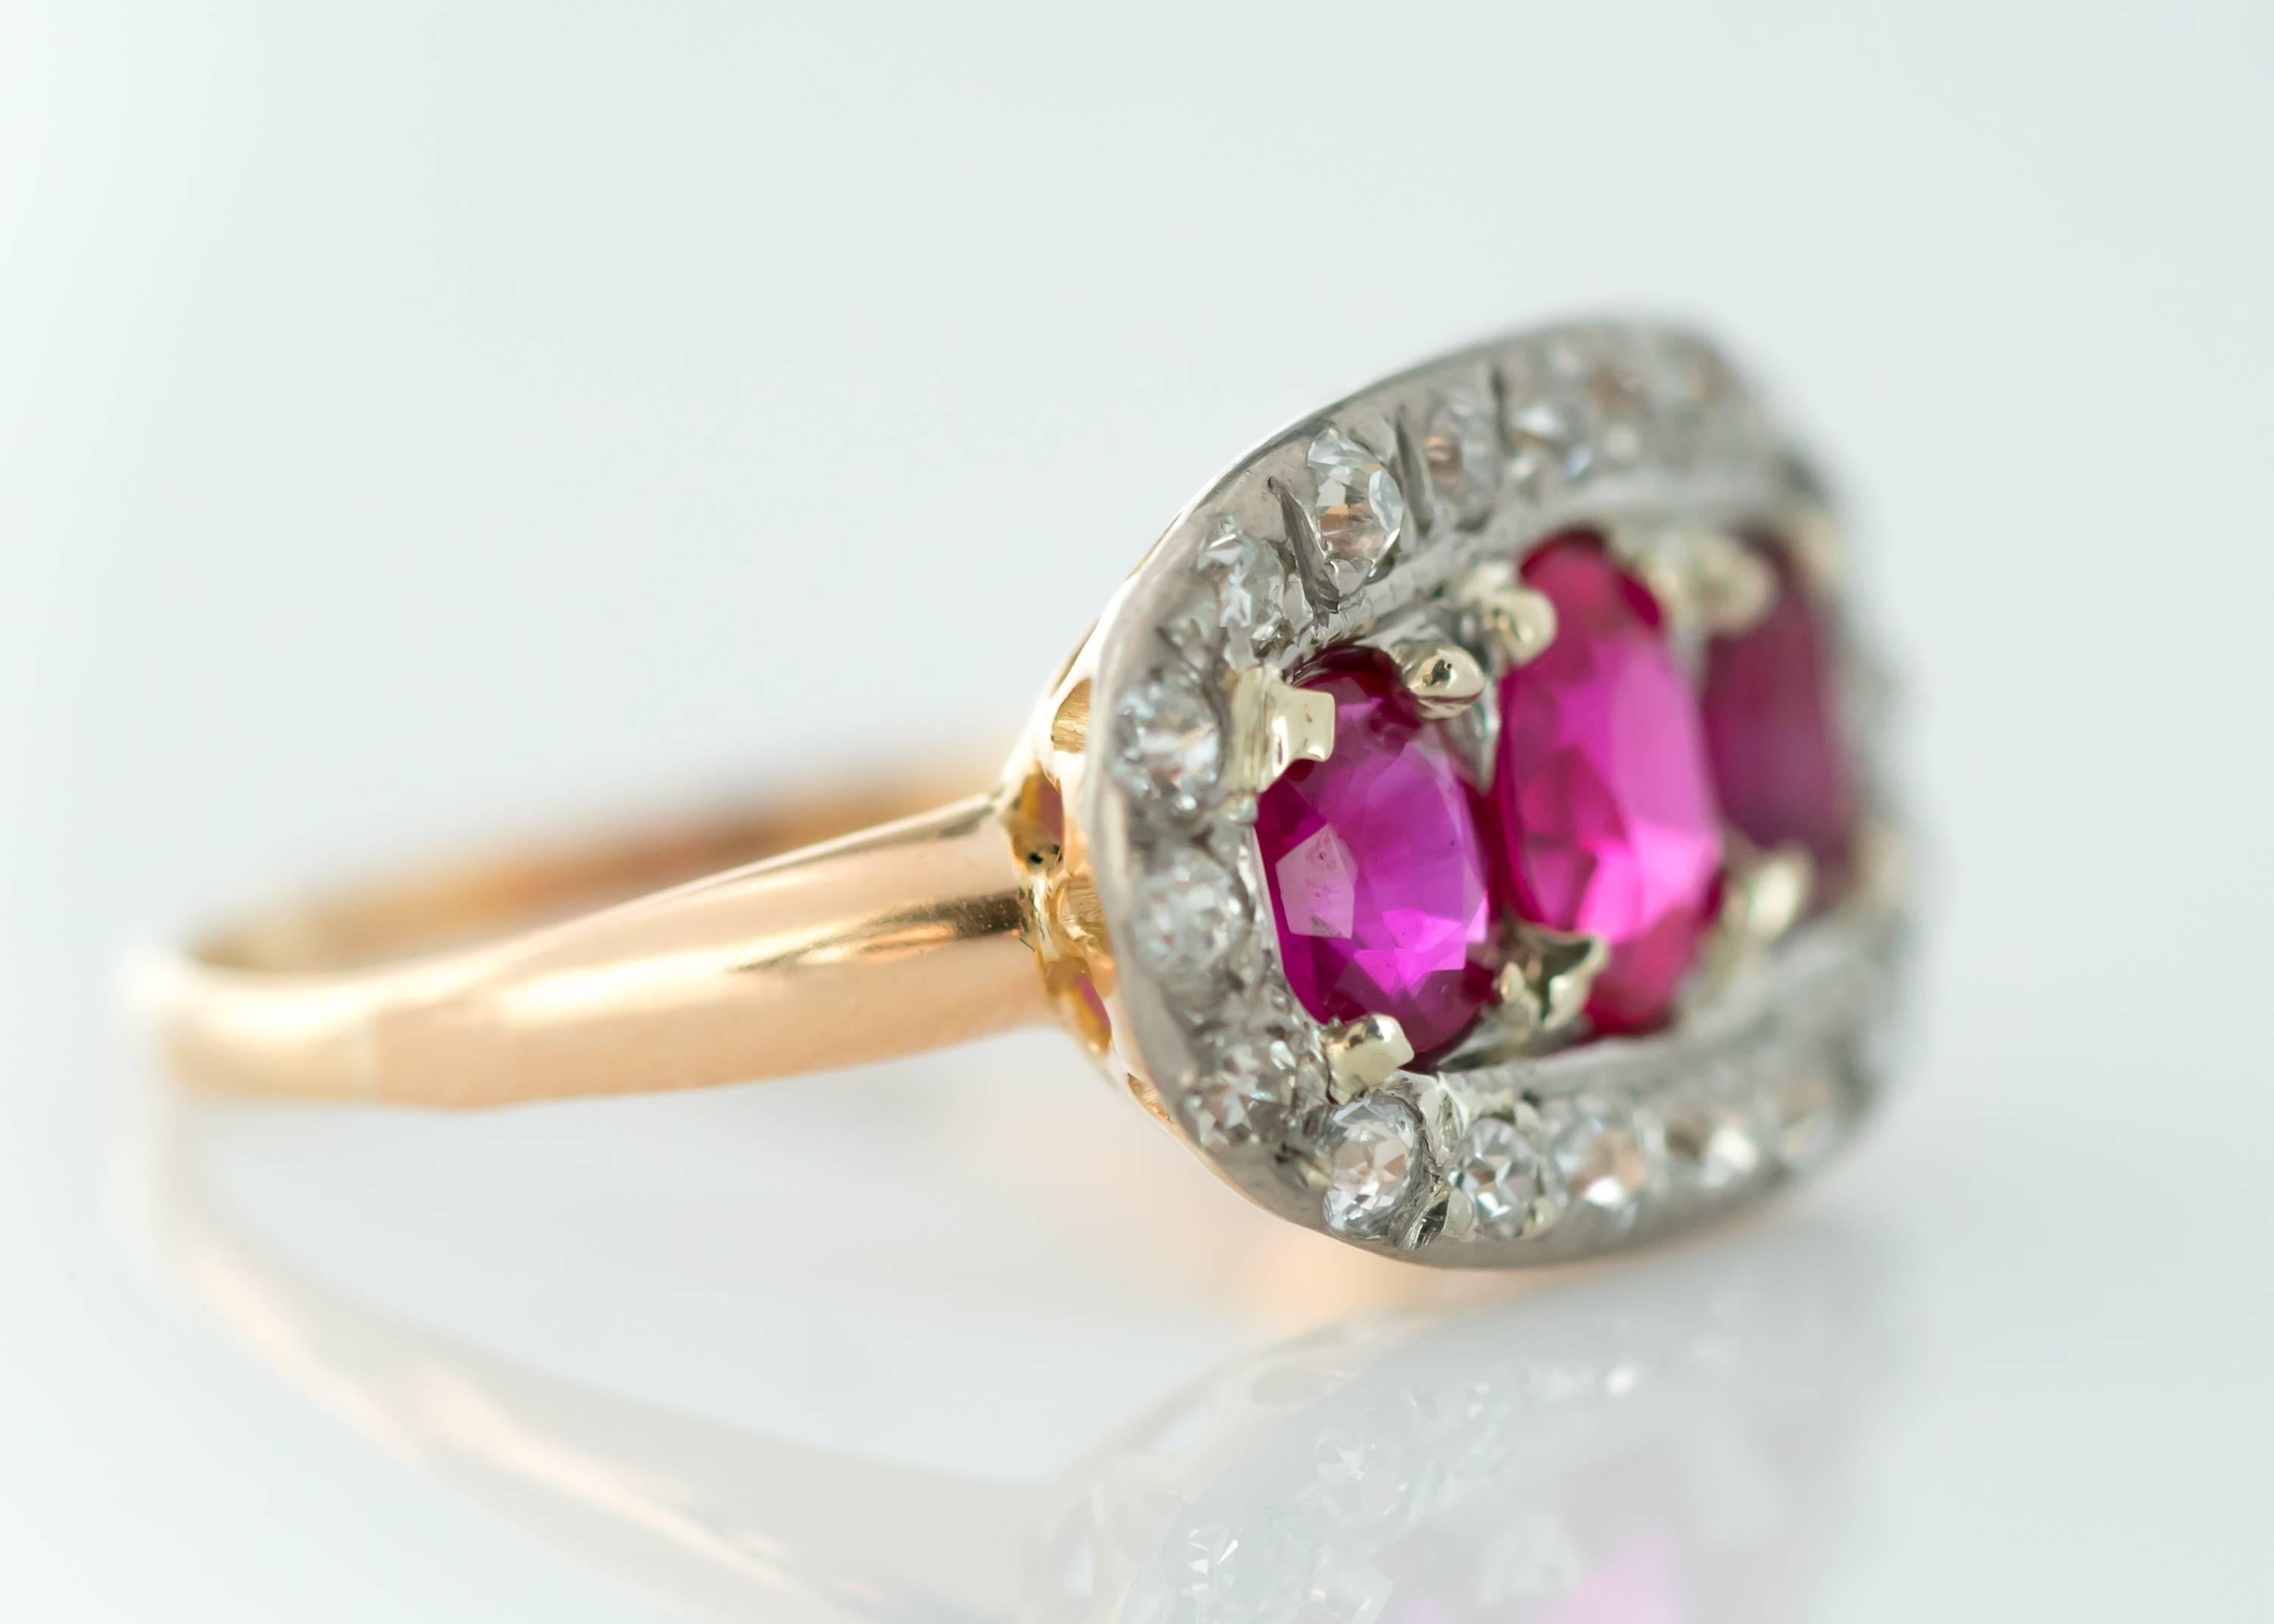 Antique 1910s Edwardian Ruby ring with Old Mine Diamond Halo

Features 3 Oval Rubies surrounded by an Old Mine Diamond Halo. This ring has a Platinum top with an 18 Karat Yellow Gold back and shank. Fine filigree detail forms a delicate gallery